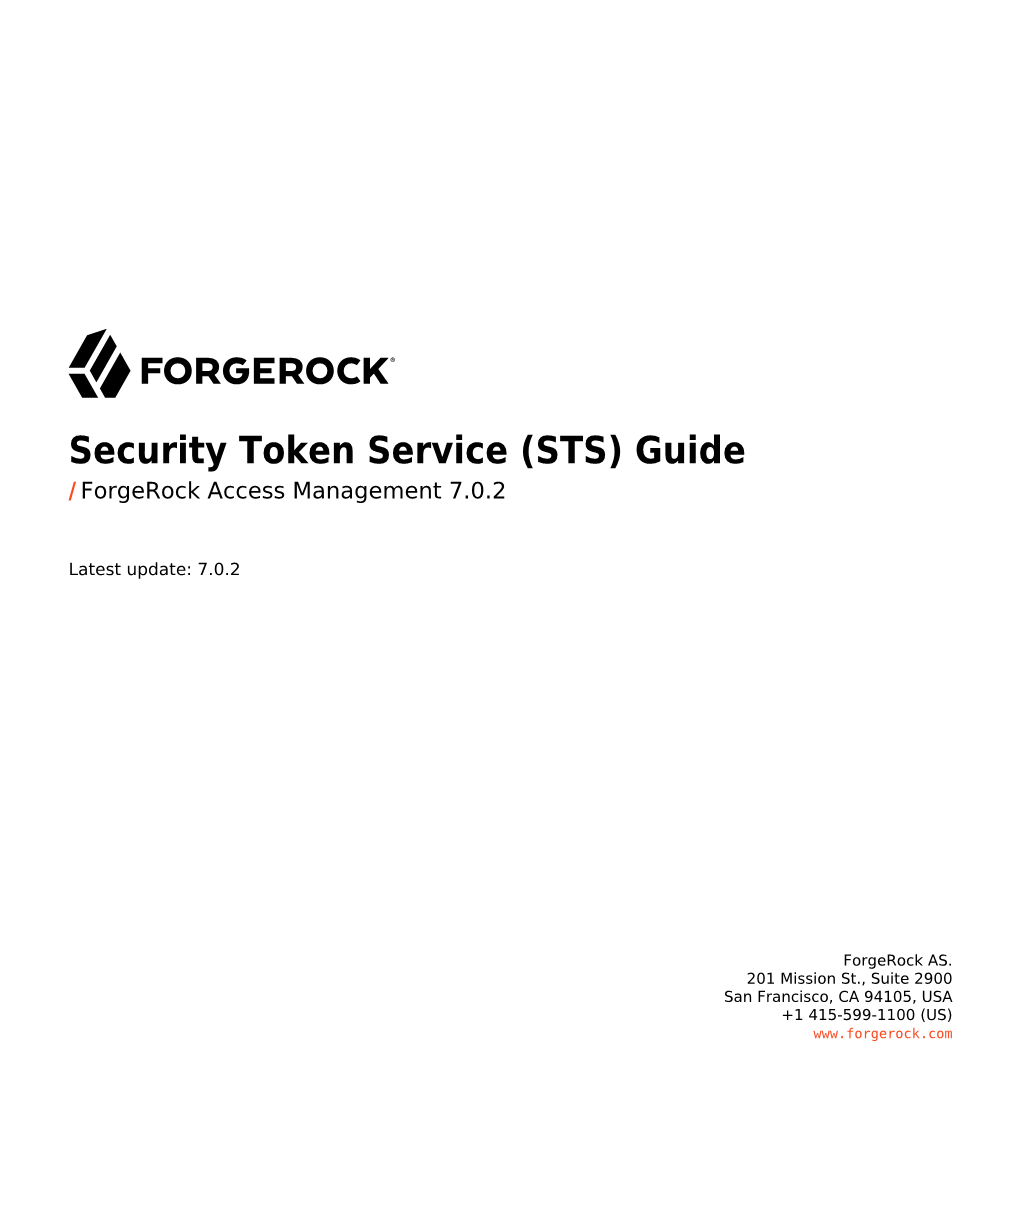 Security Token Service (STS) Guide / Forgerock Access Management 7.0.2